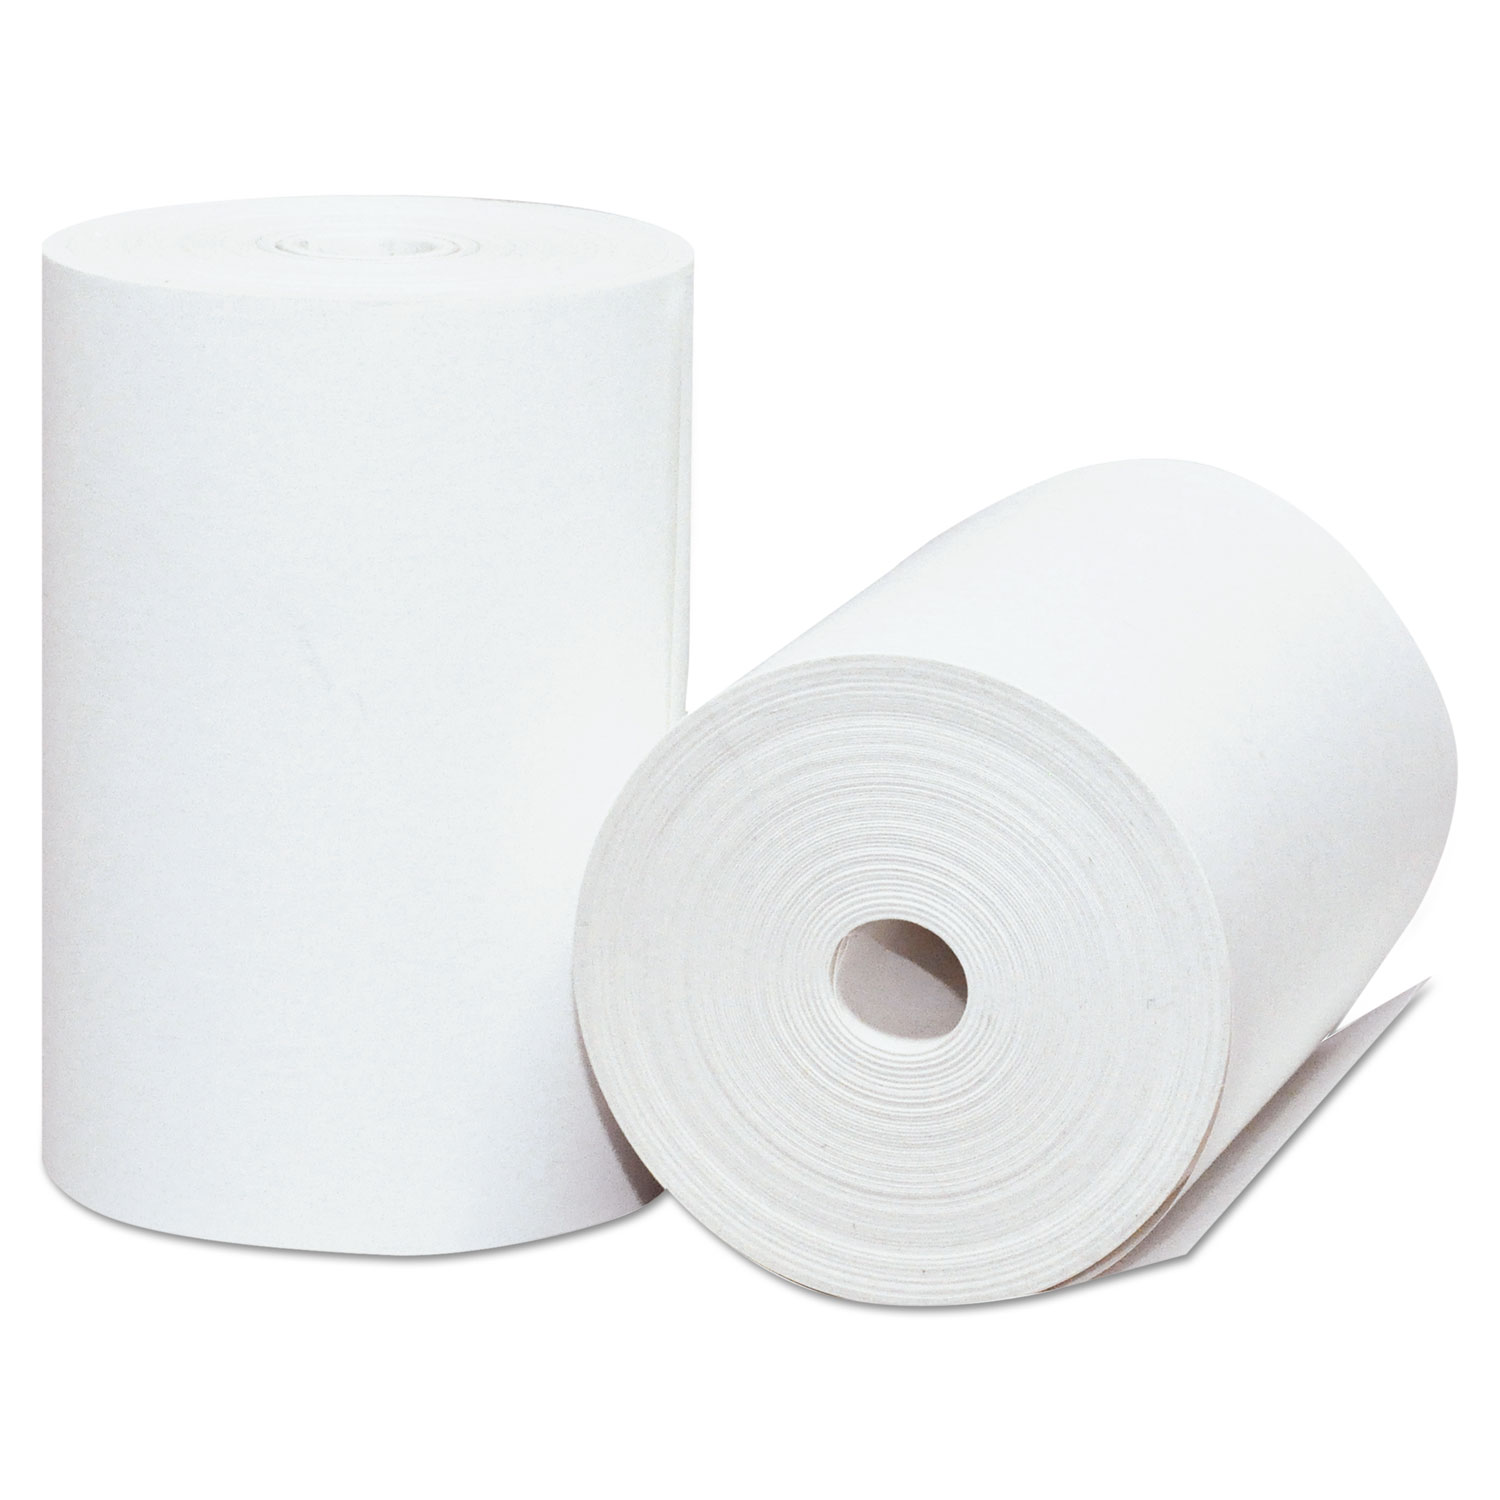  Iconex 527550 Direct Thermal Printing Thermal Paper Rolls, 2.25 x 75 ft, White, 50/Carton (ICX90720005) 